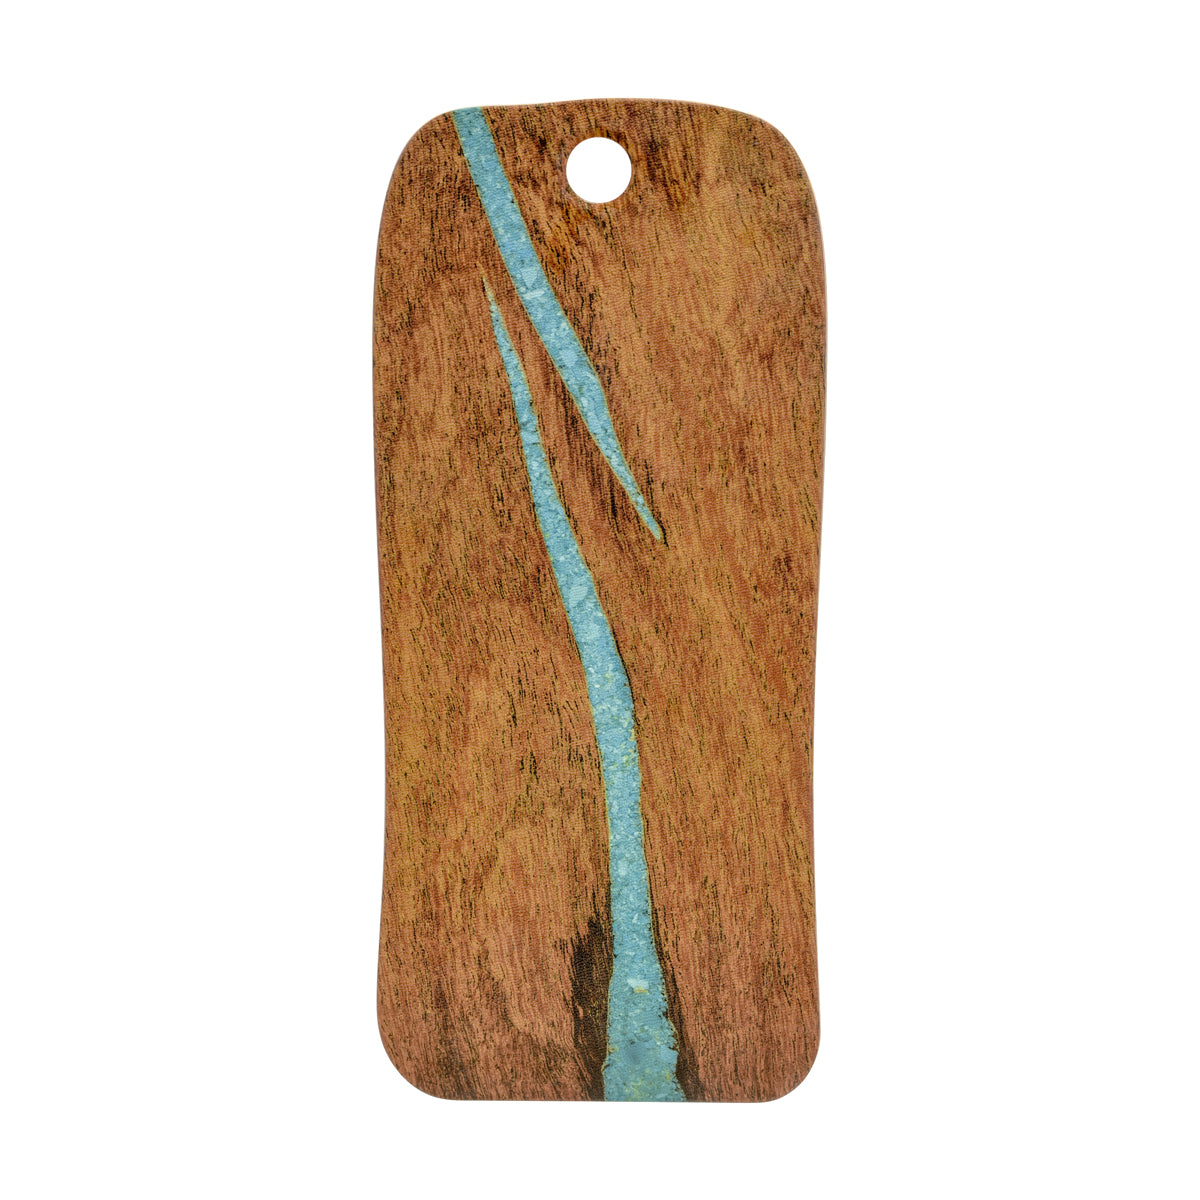 Rectangular Board - 511x228mm, Lapis, Cherry with Turquoise from Cheforward. Sold in boxes of 6. Hospitality quality at wholesale price with The Flying Fork! 